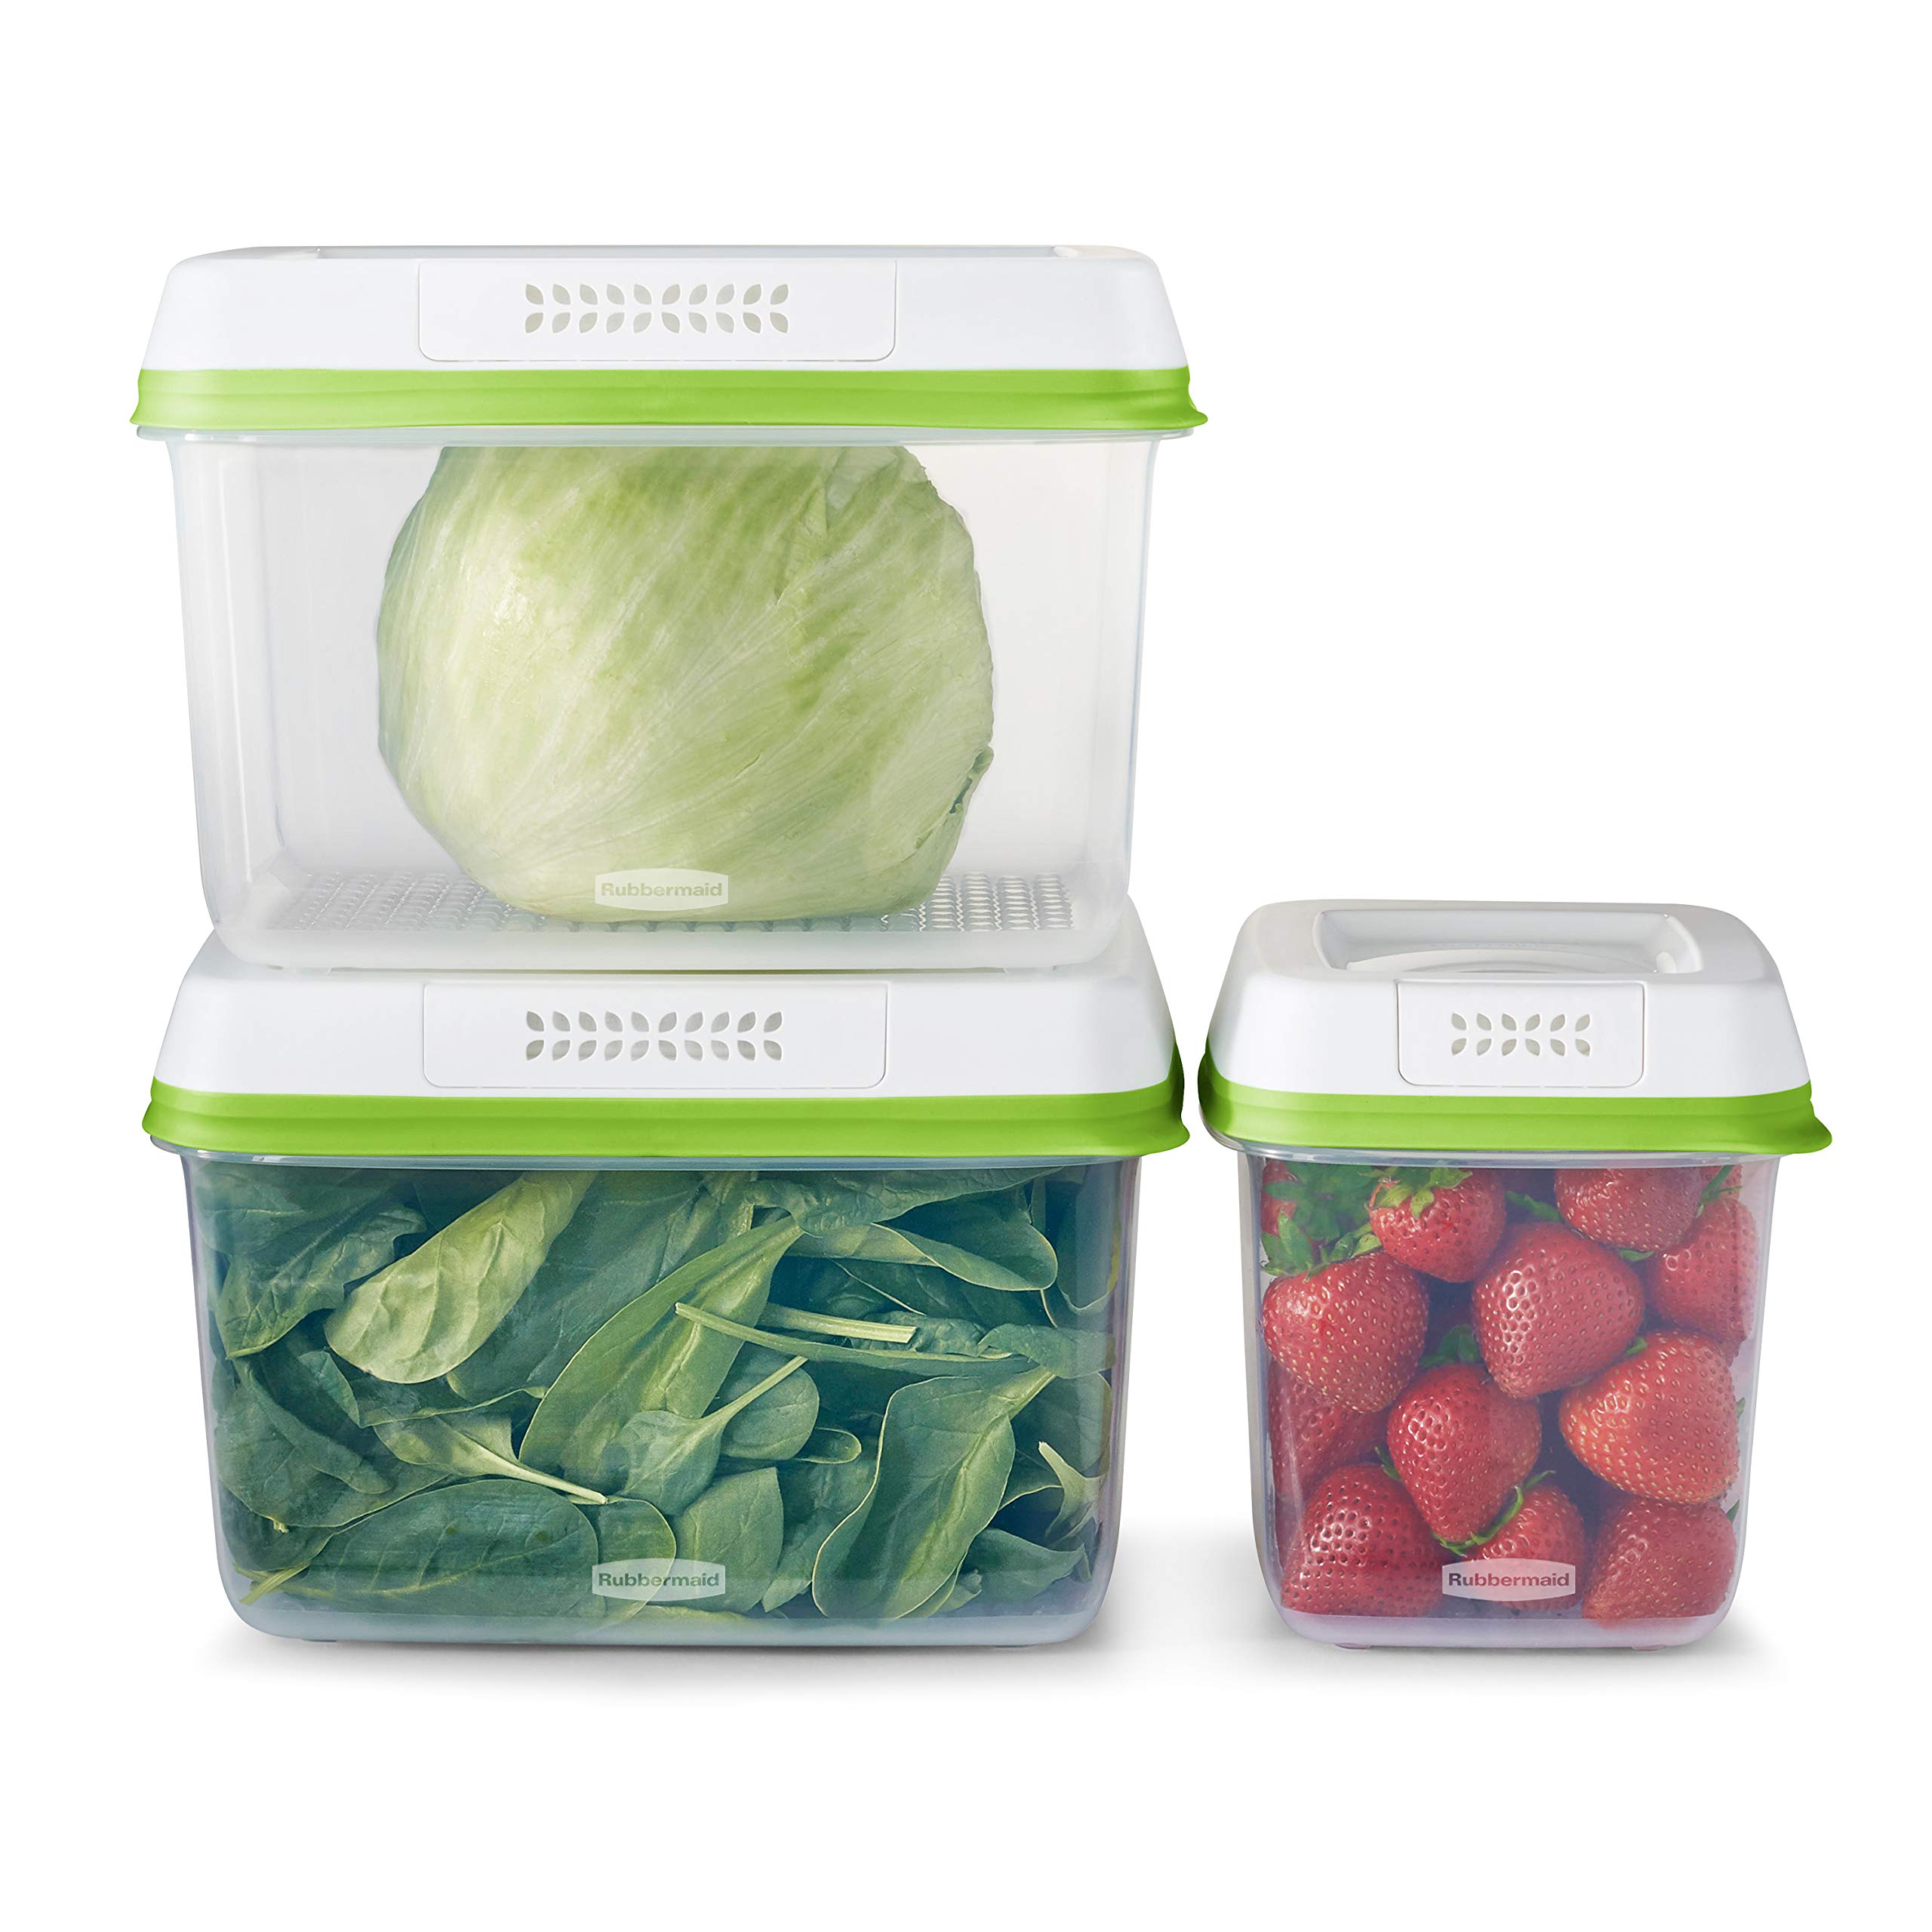 Rubbermaid Produce Saver Containers for Refrigerator, with Lids for Food Storage, Dishwasher Safe, Clear/Green, Set of 3 Containers and 3 Lids (Medium & Large), 6-Piece Set $18.39